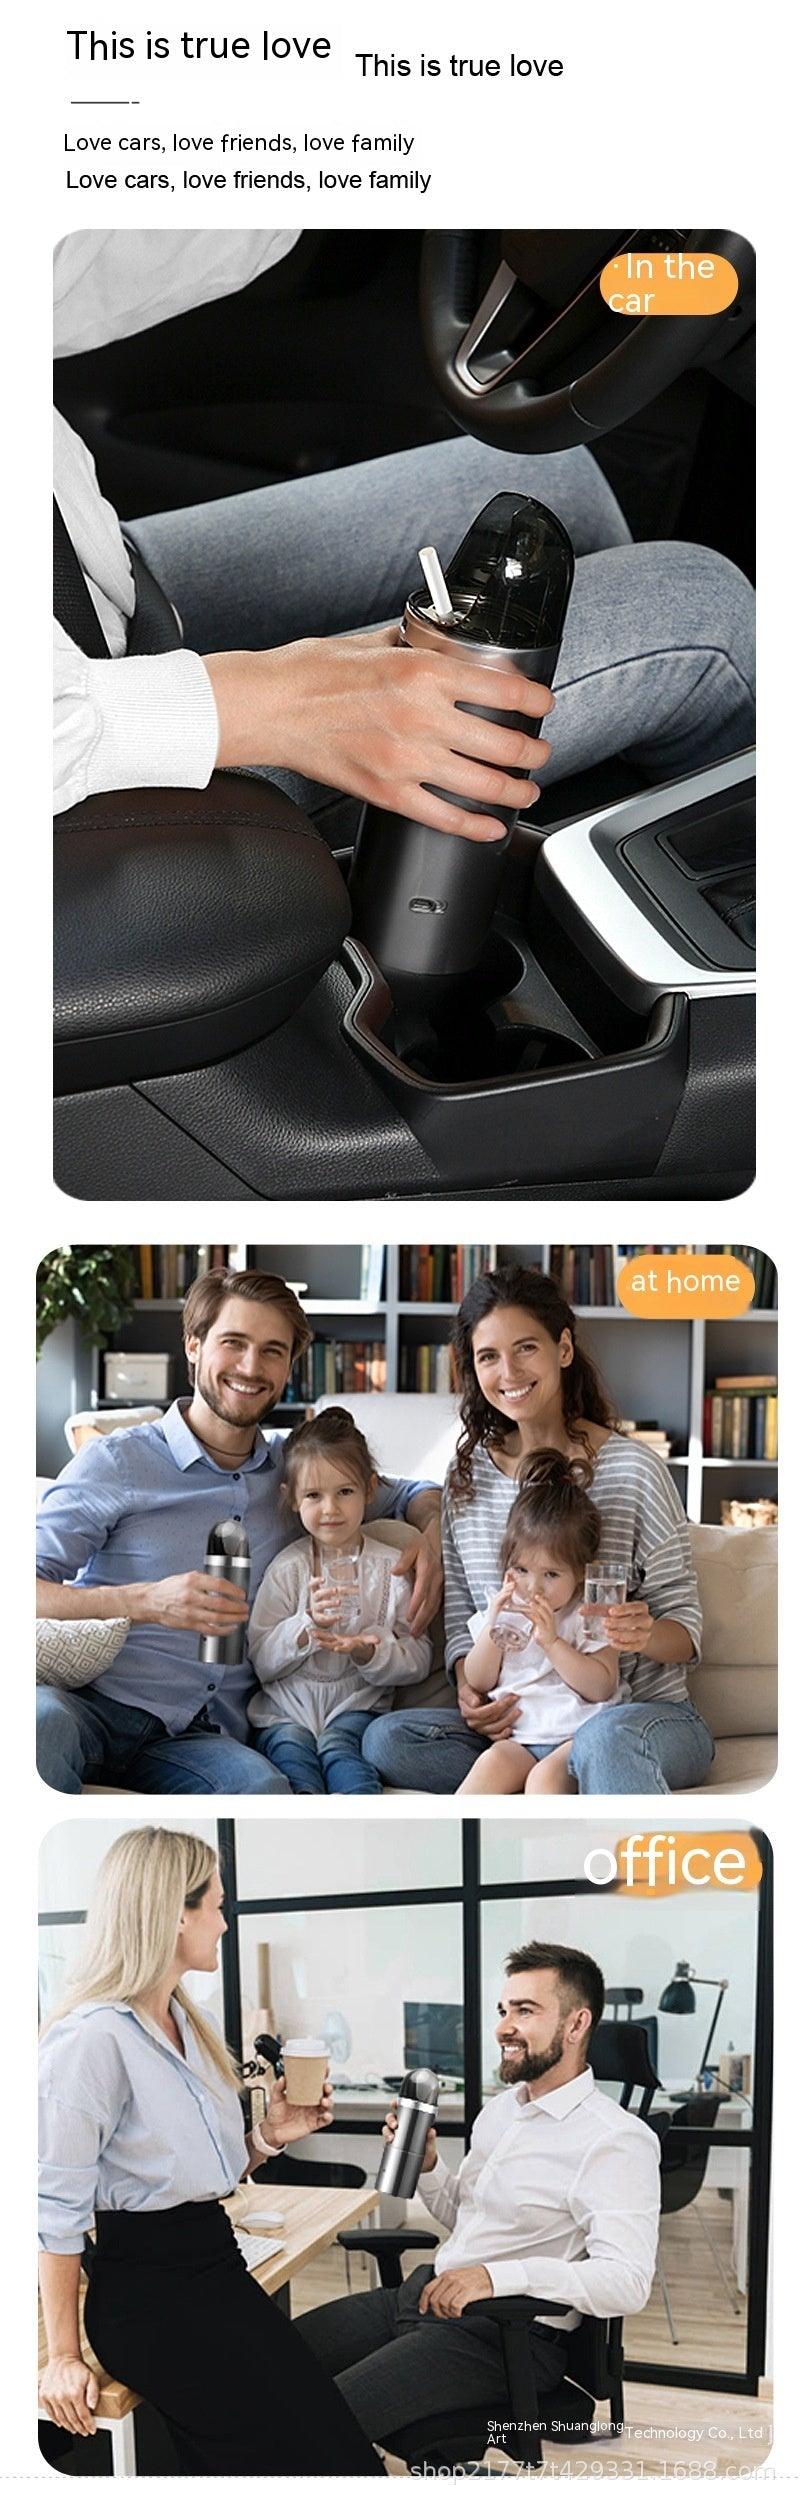 Smart Smoke Handheld Vintage Cigar Ashtray Air Purifier Small Car Wireless Dual Use In Car And Home - EX-STOCK CANADA